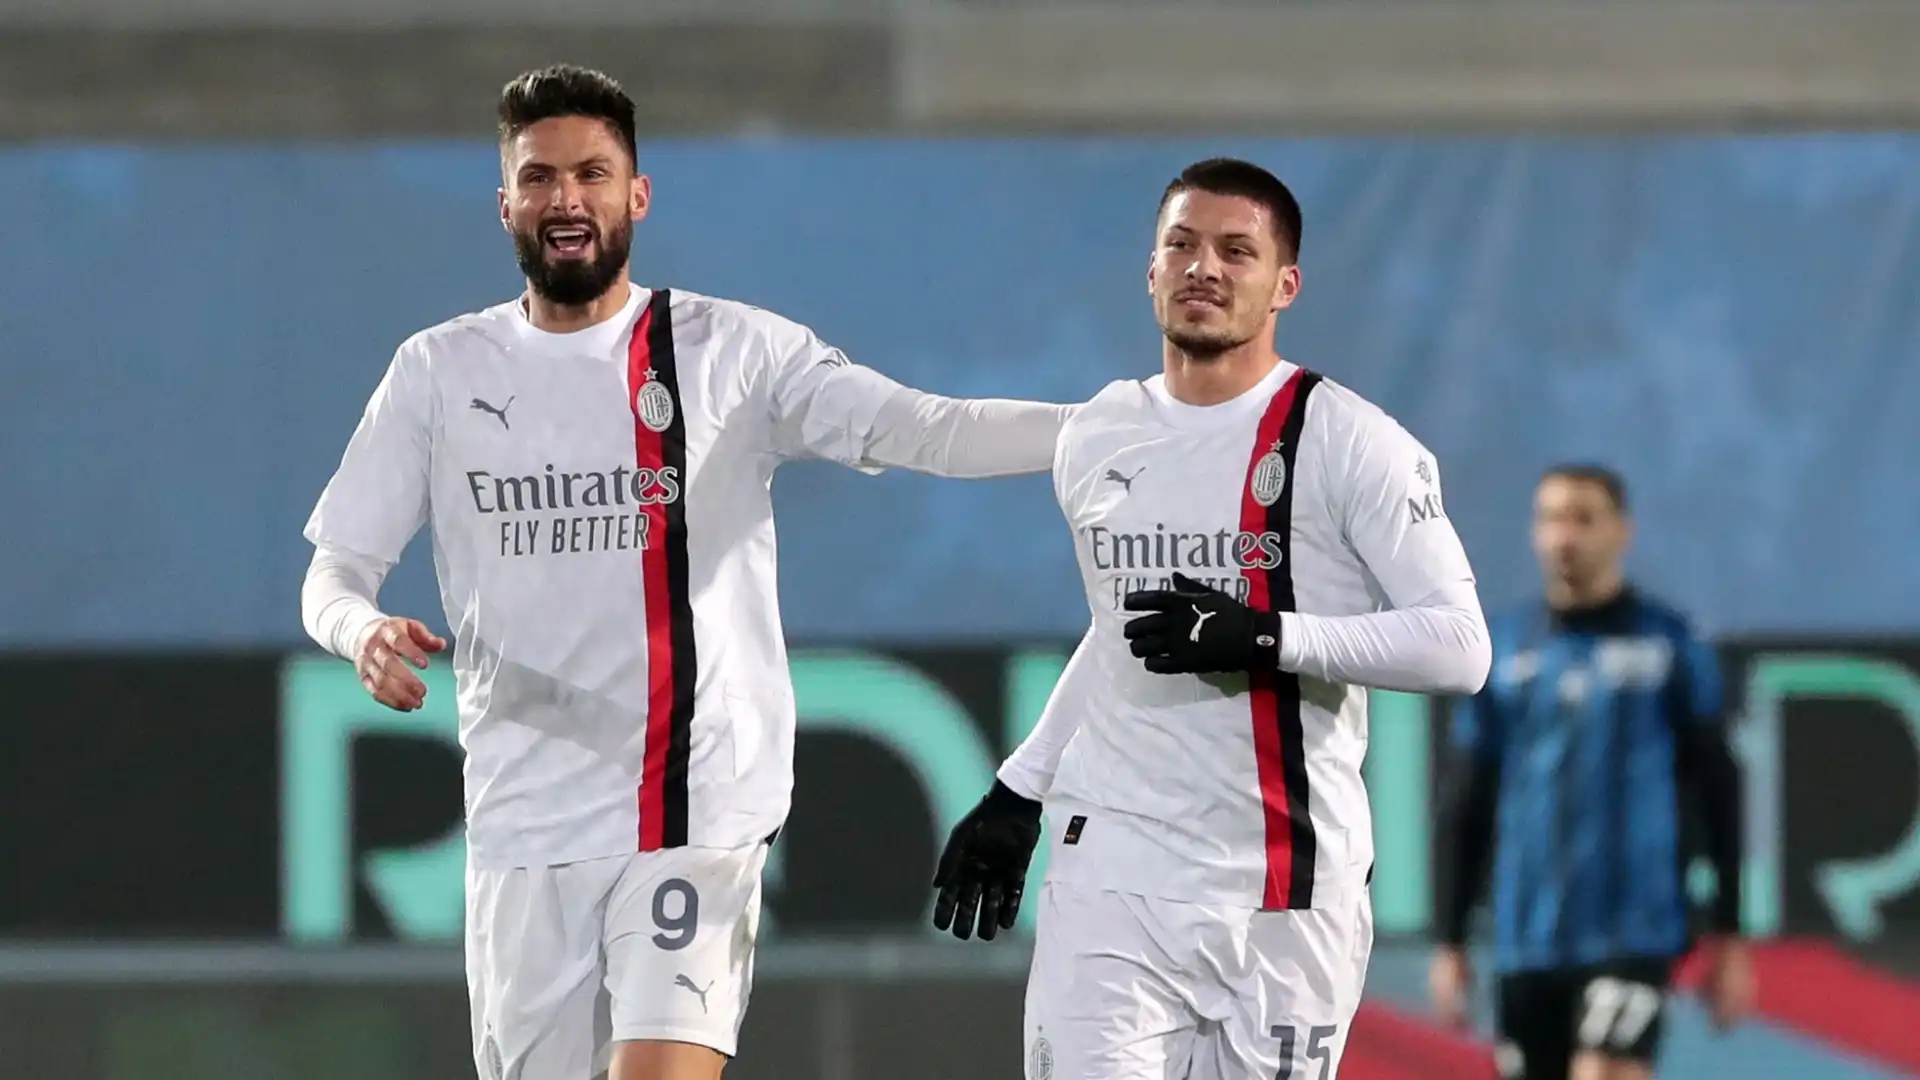 Olivier Giroud has decided to wait to announce his Milan departure, but further confirmations about his MLS future have come from France manager Deschamps.